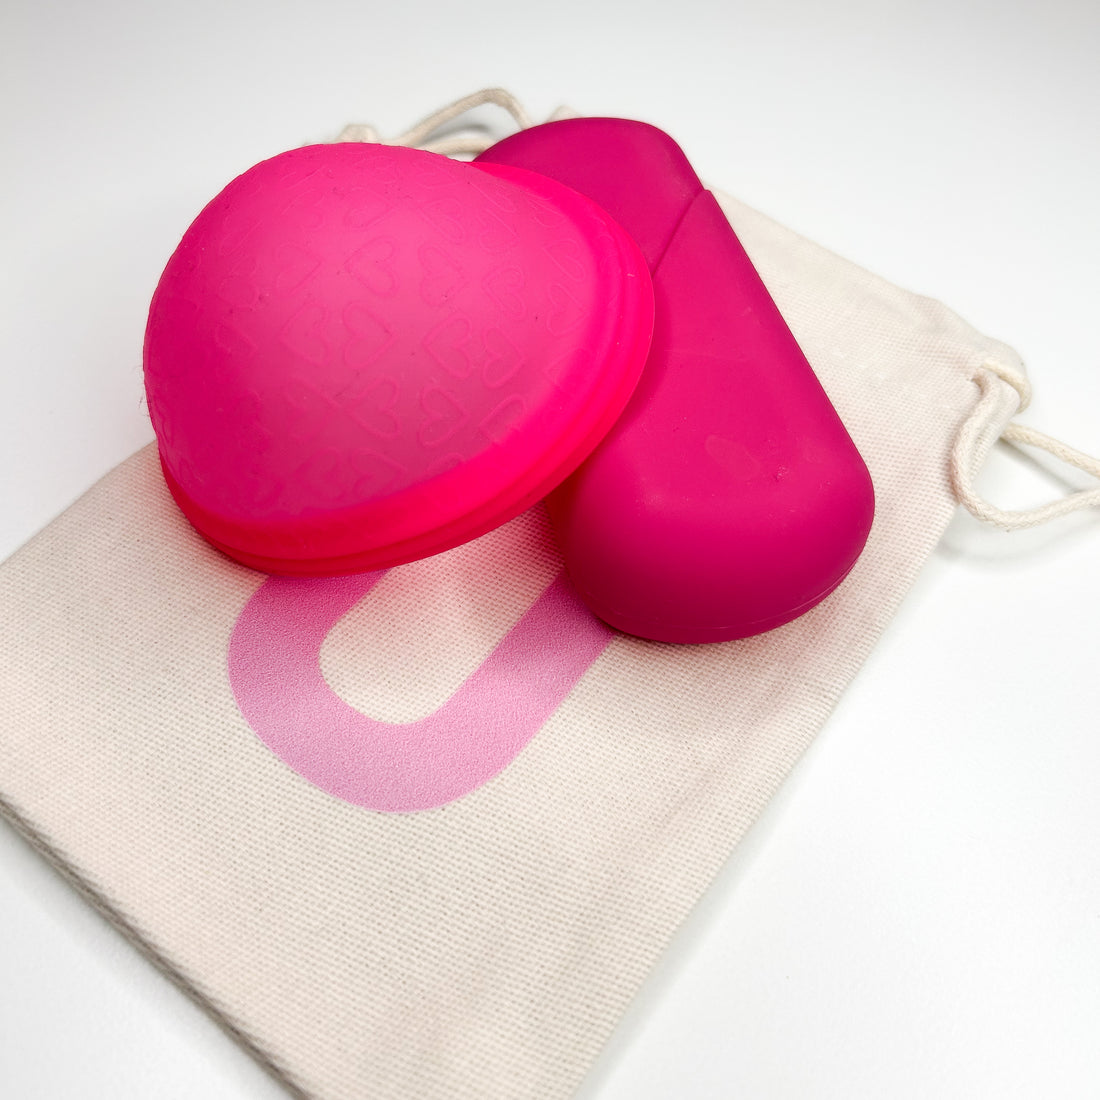 Packaging of the menstrual disc product